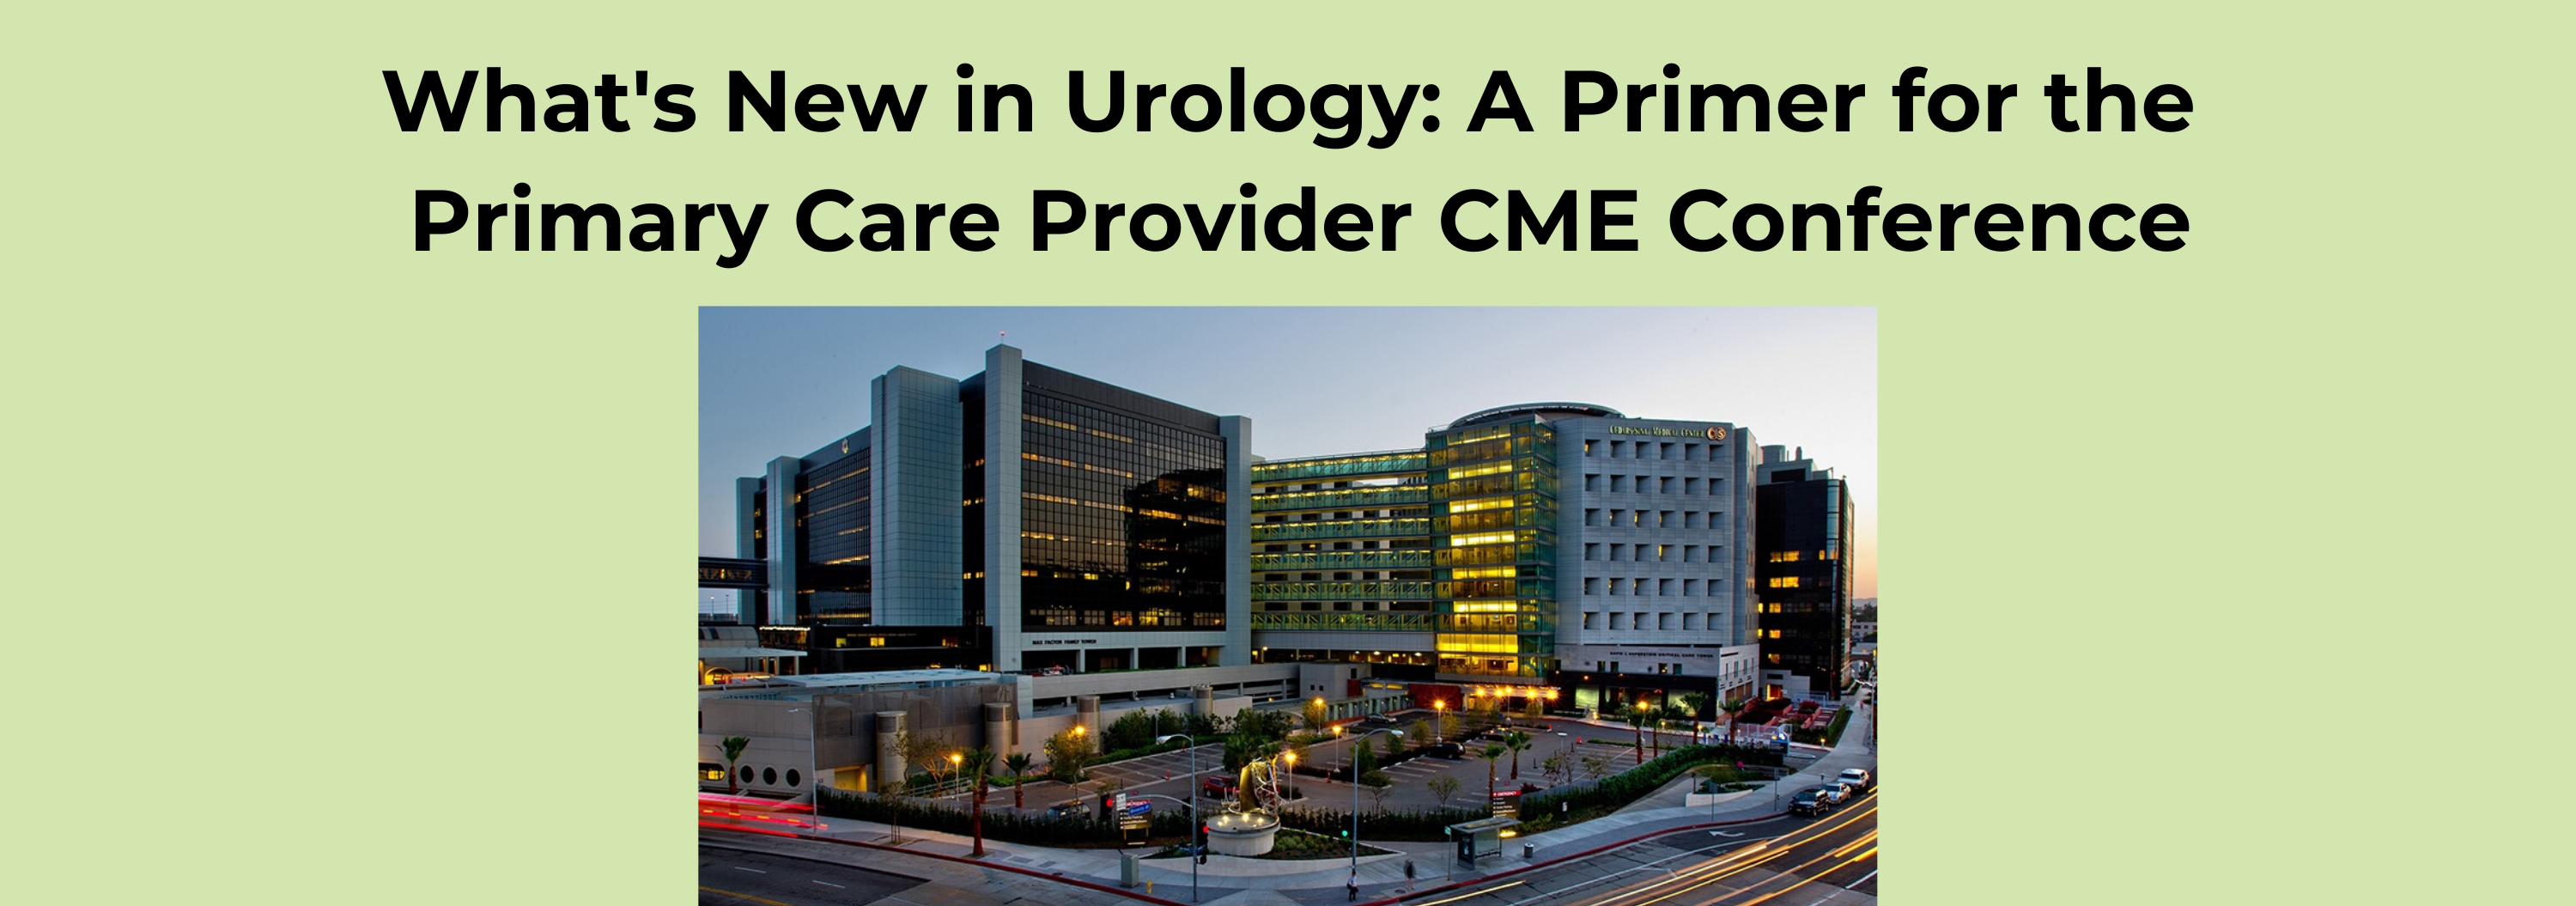 CANCELLED-2020 What's New in Urology: A Primer for the Primary Care Provider CME Conference Banner